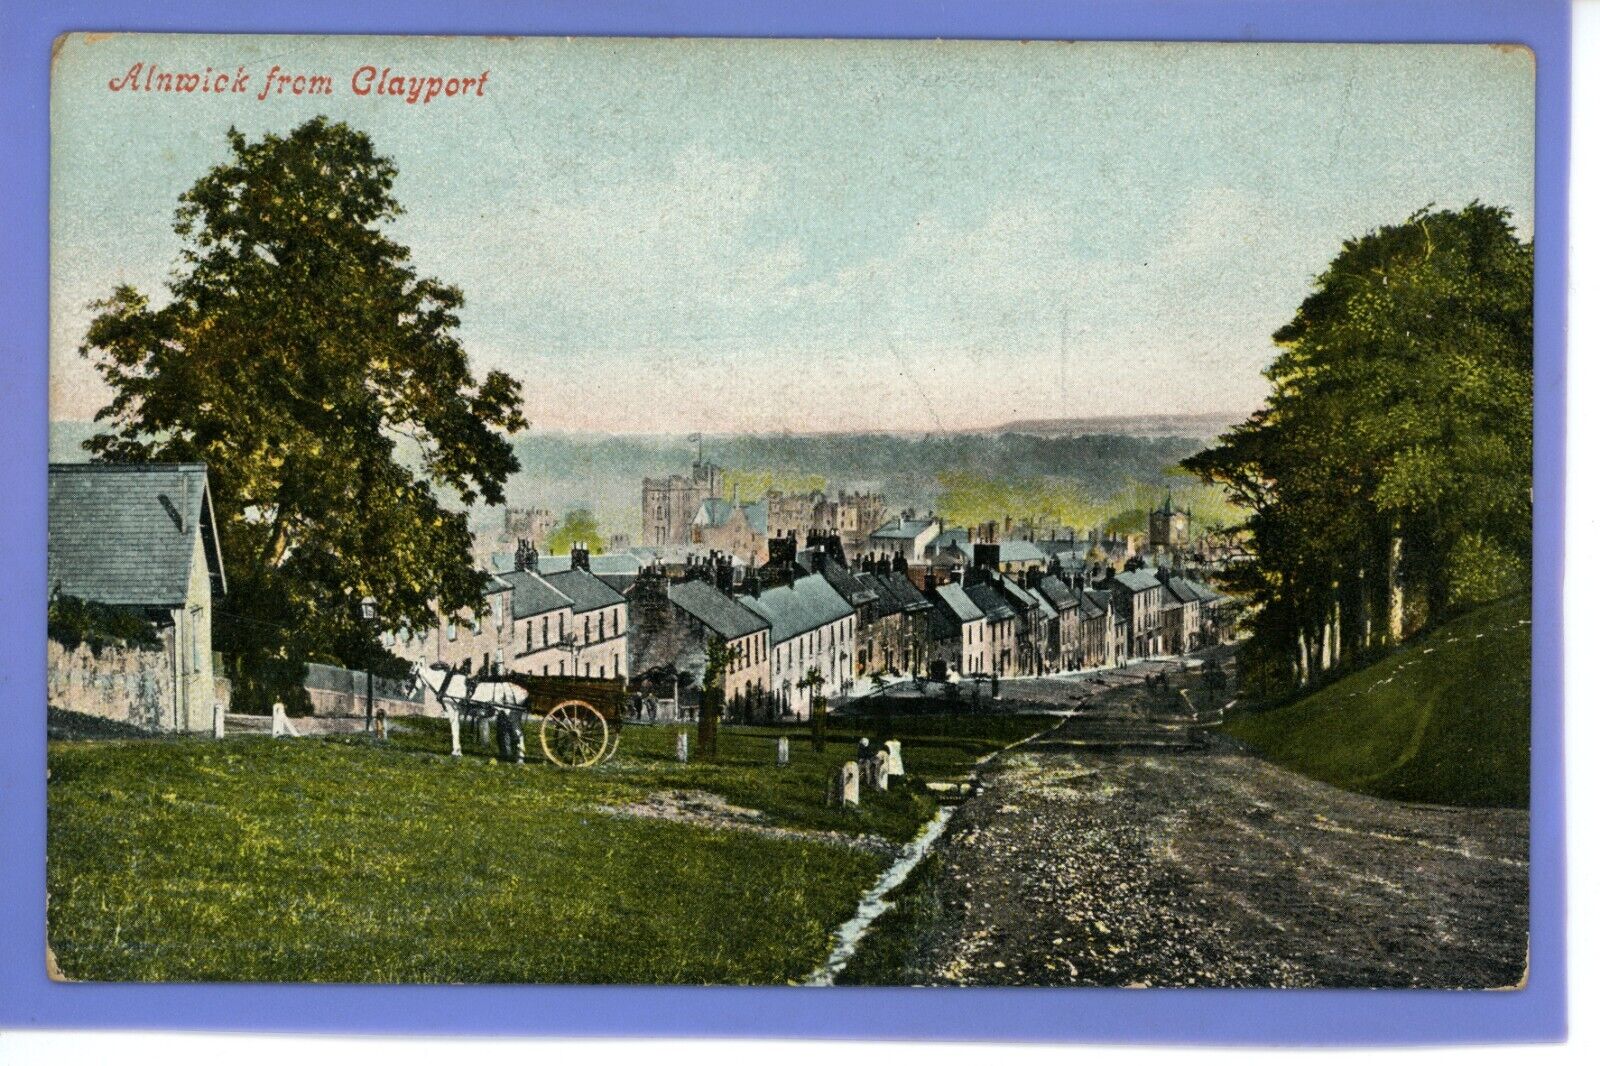 House Clearance - OLD VINTAGE POSTCARD ALNWICK FROM CLAYPORT NORTHUMBERLAND HORSE & CART